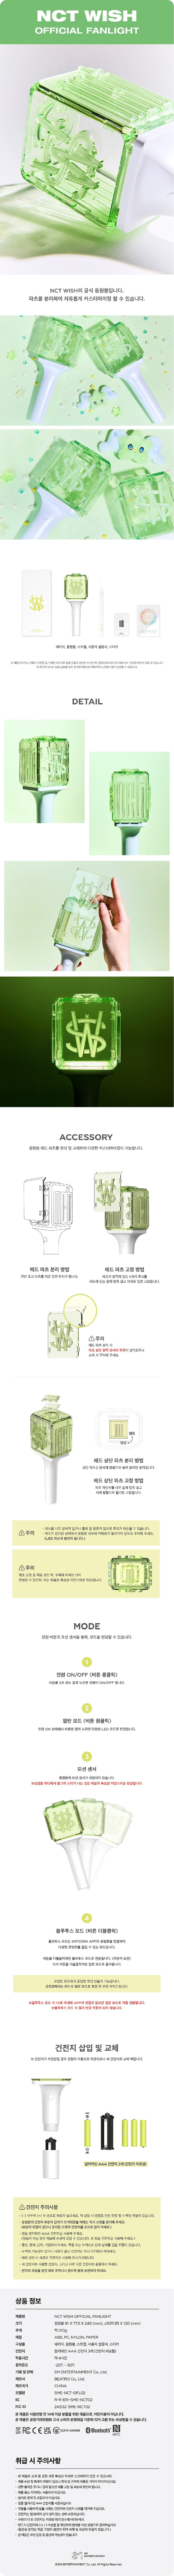 [PRE-ORDER ONLY] NCT OFFICIAL LIGHT STICK VER.2 (NCT WISH VER.)